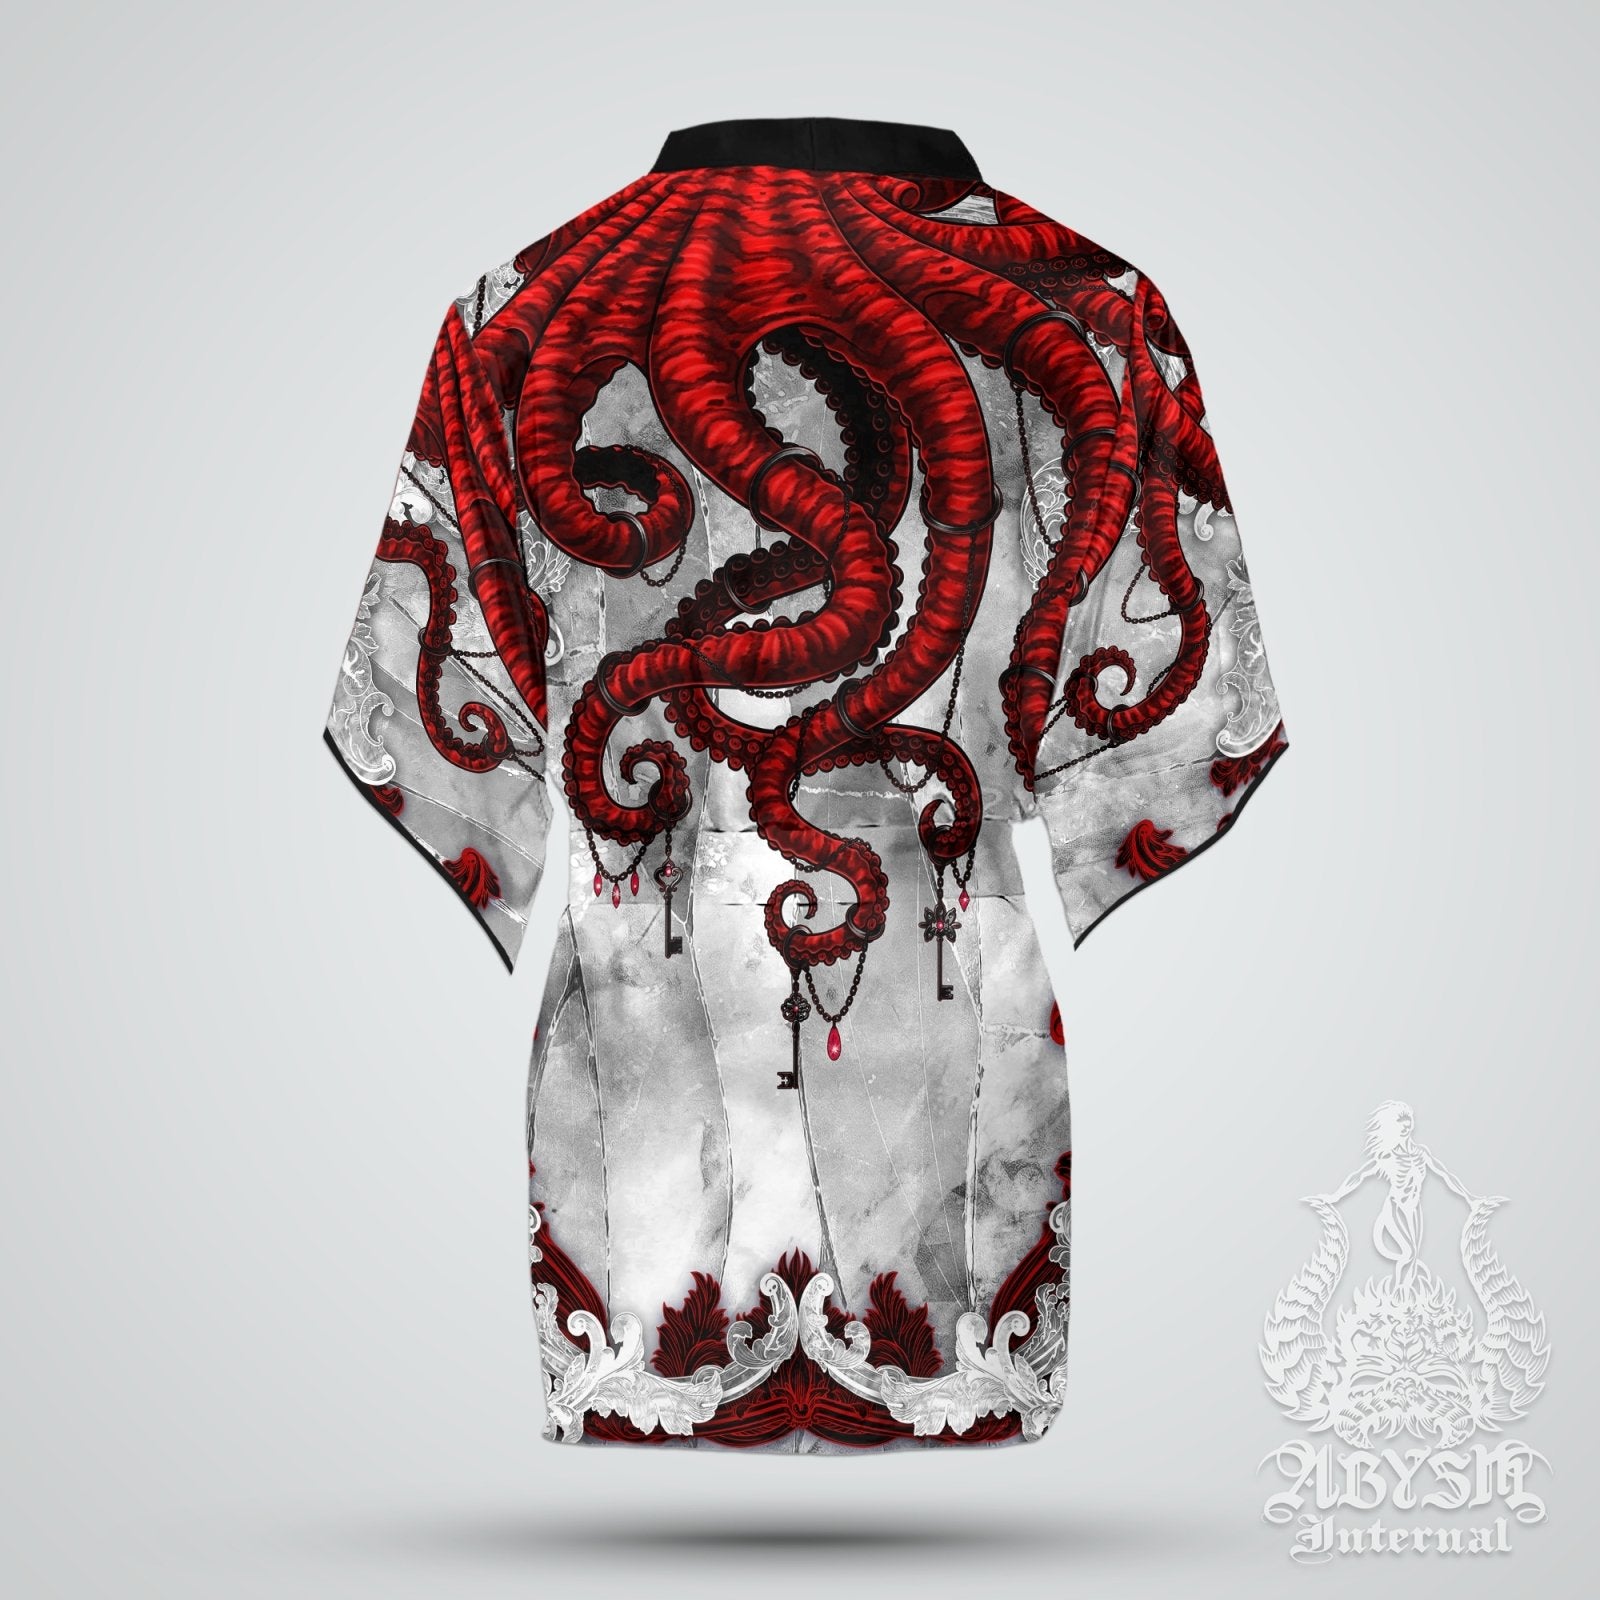 Beach Cover Up, Beach Outfit, Octopus Party Kimono, Summer Festival Robe, Indie and Alternative Clothing, Unisex - White Bloody Goth - Abysm Internal